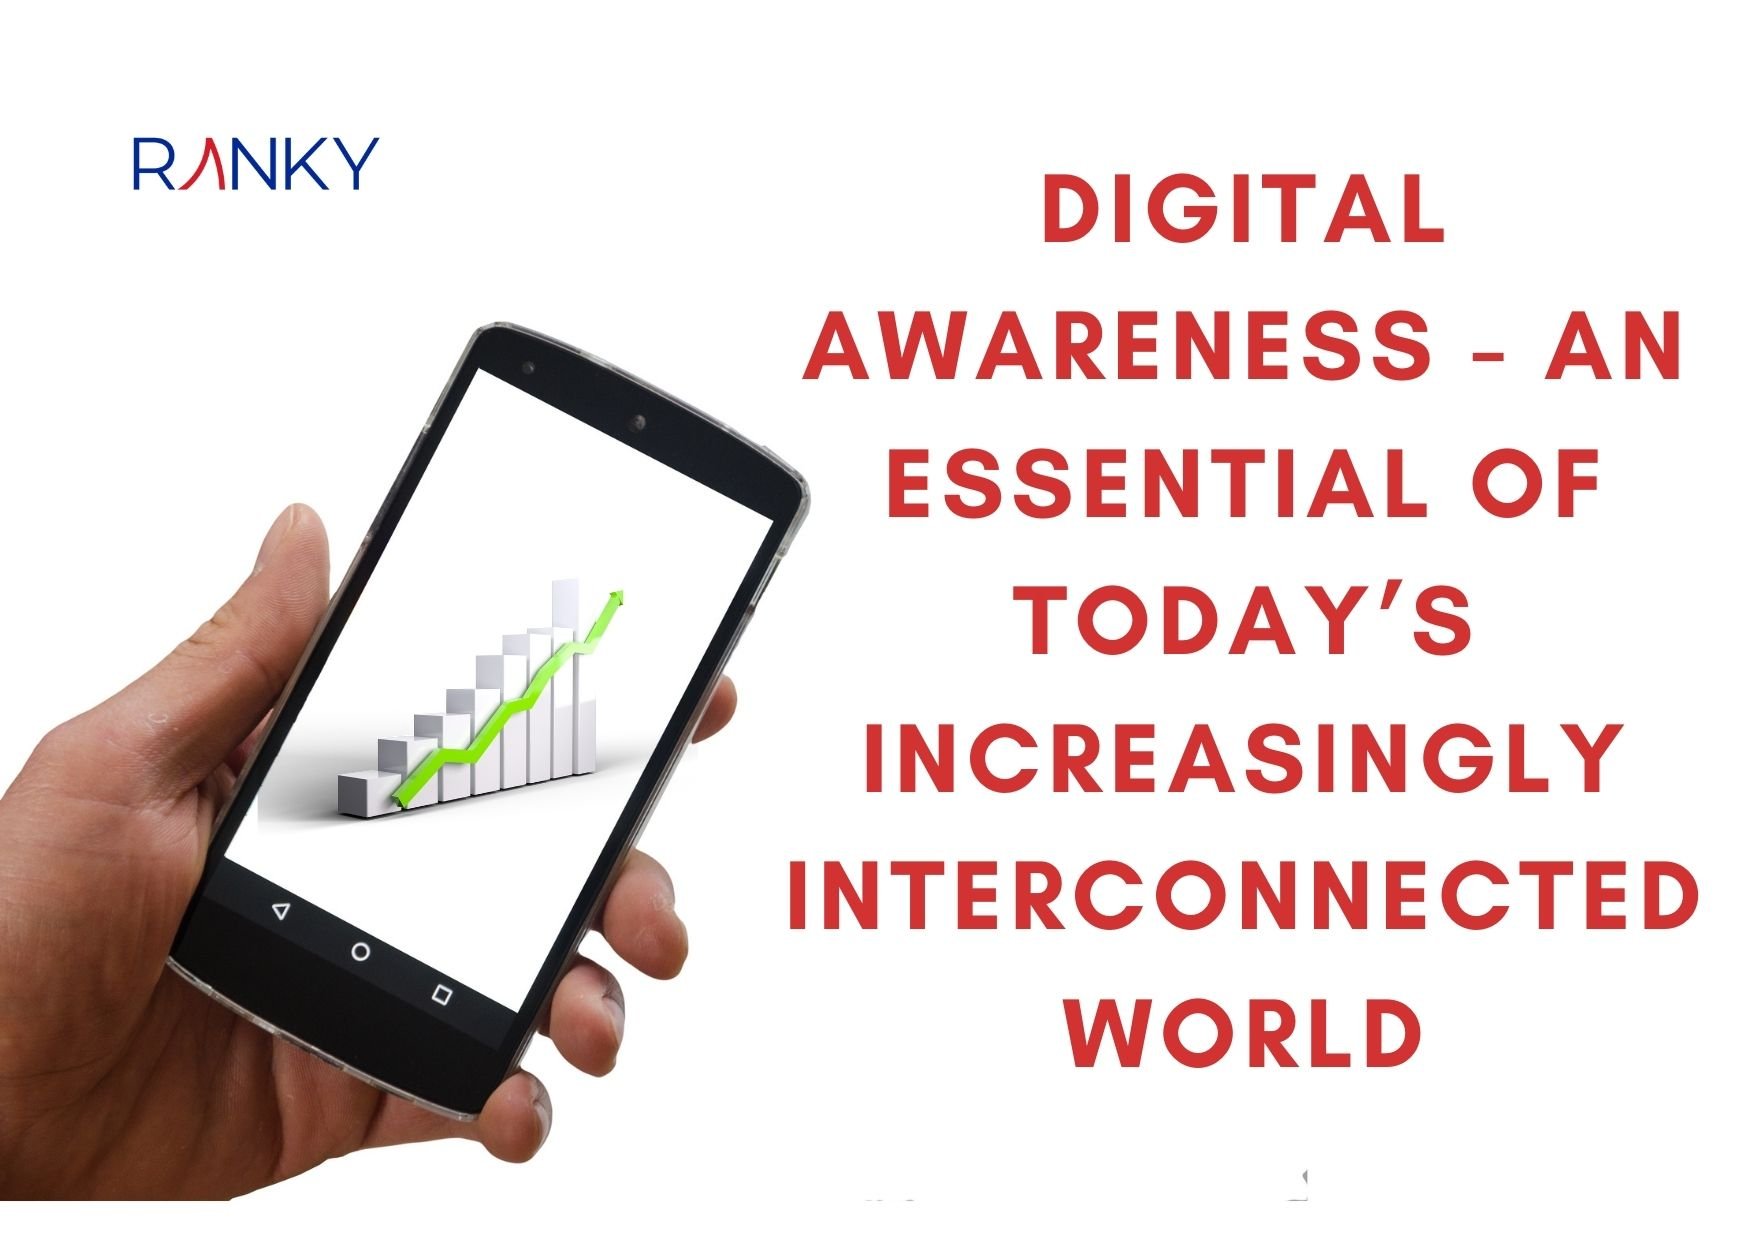 Digital Awareness - An Essential of Today’s Increasingly Interconnected World